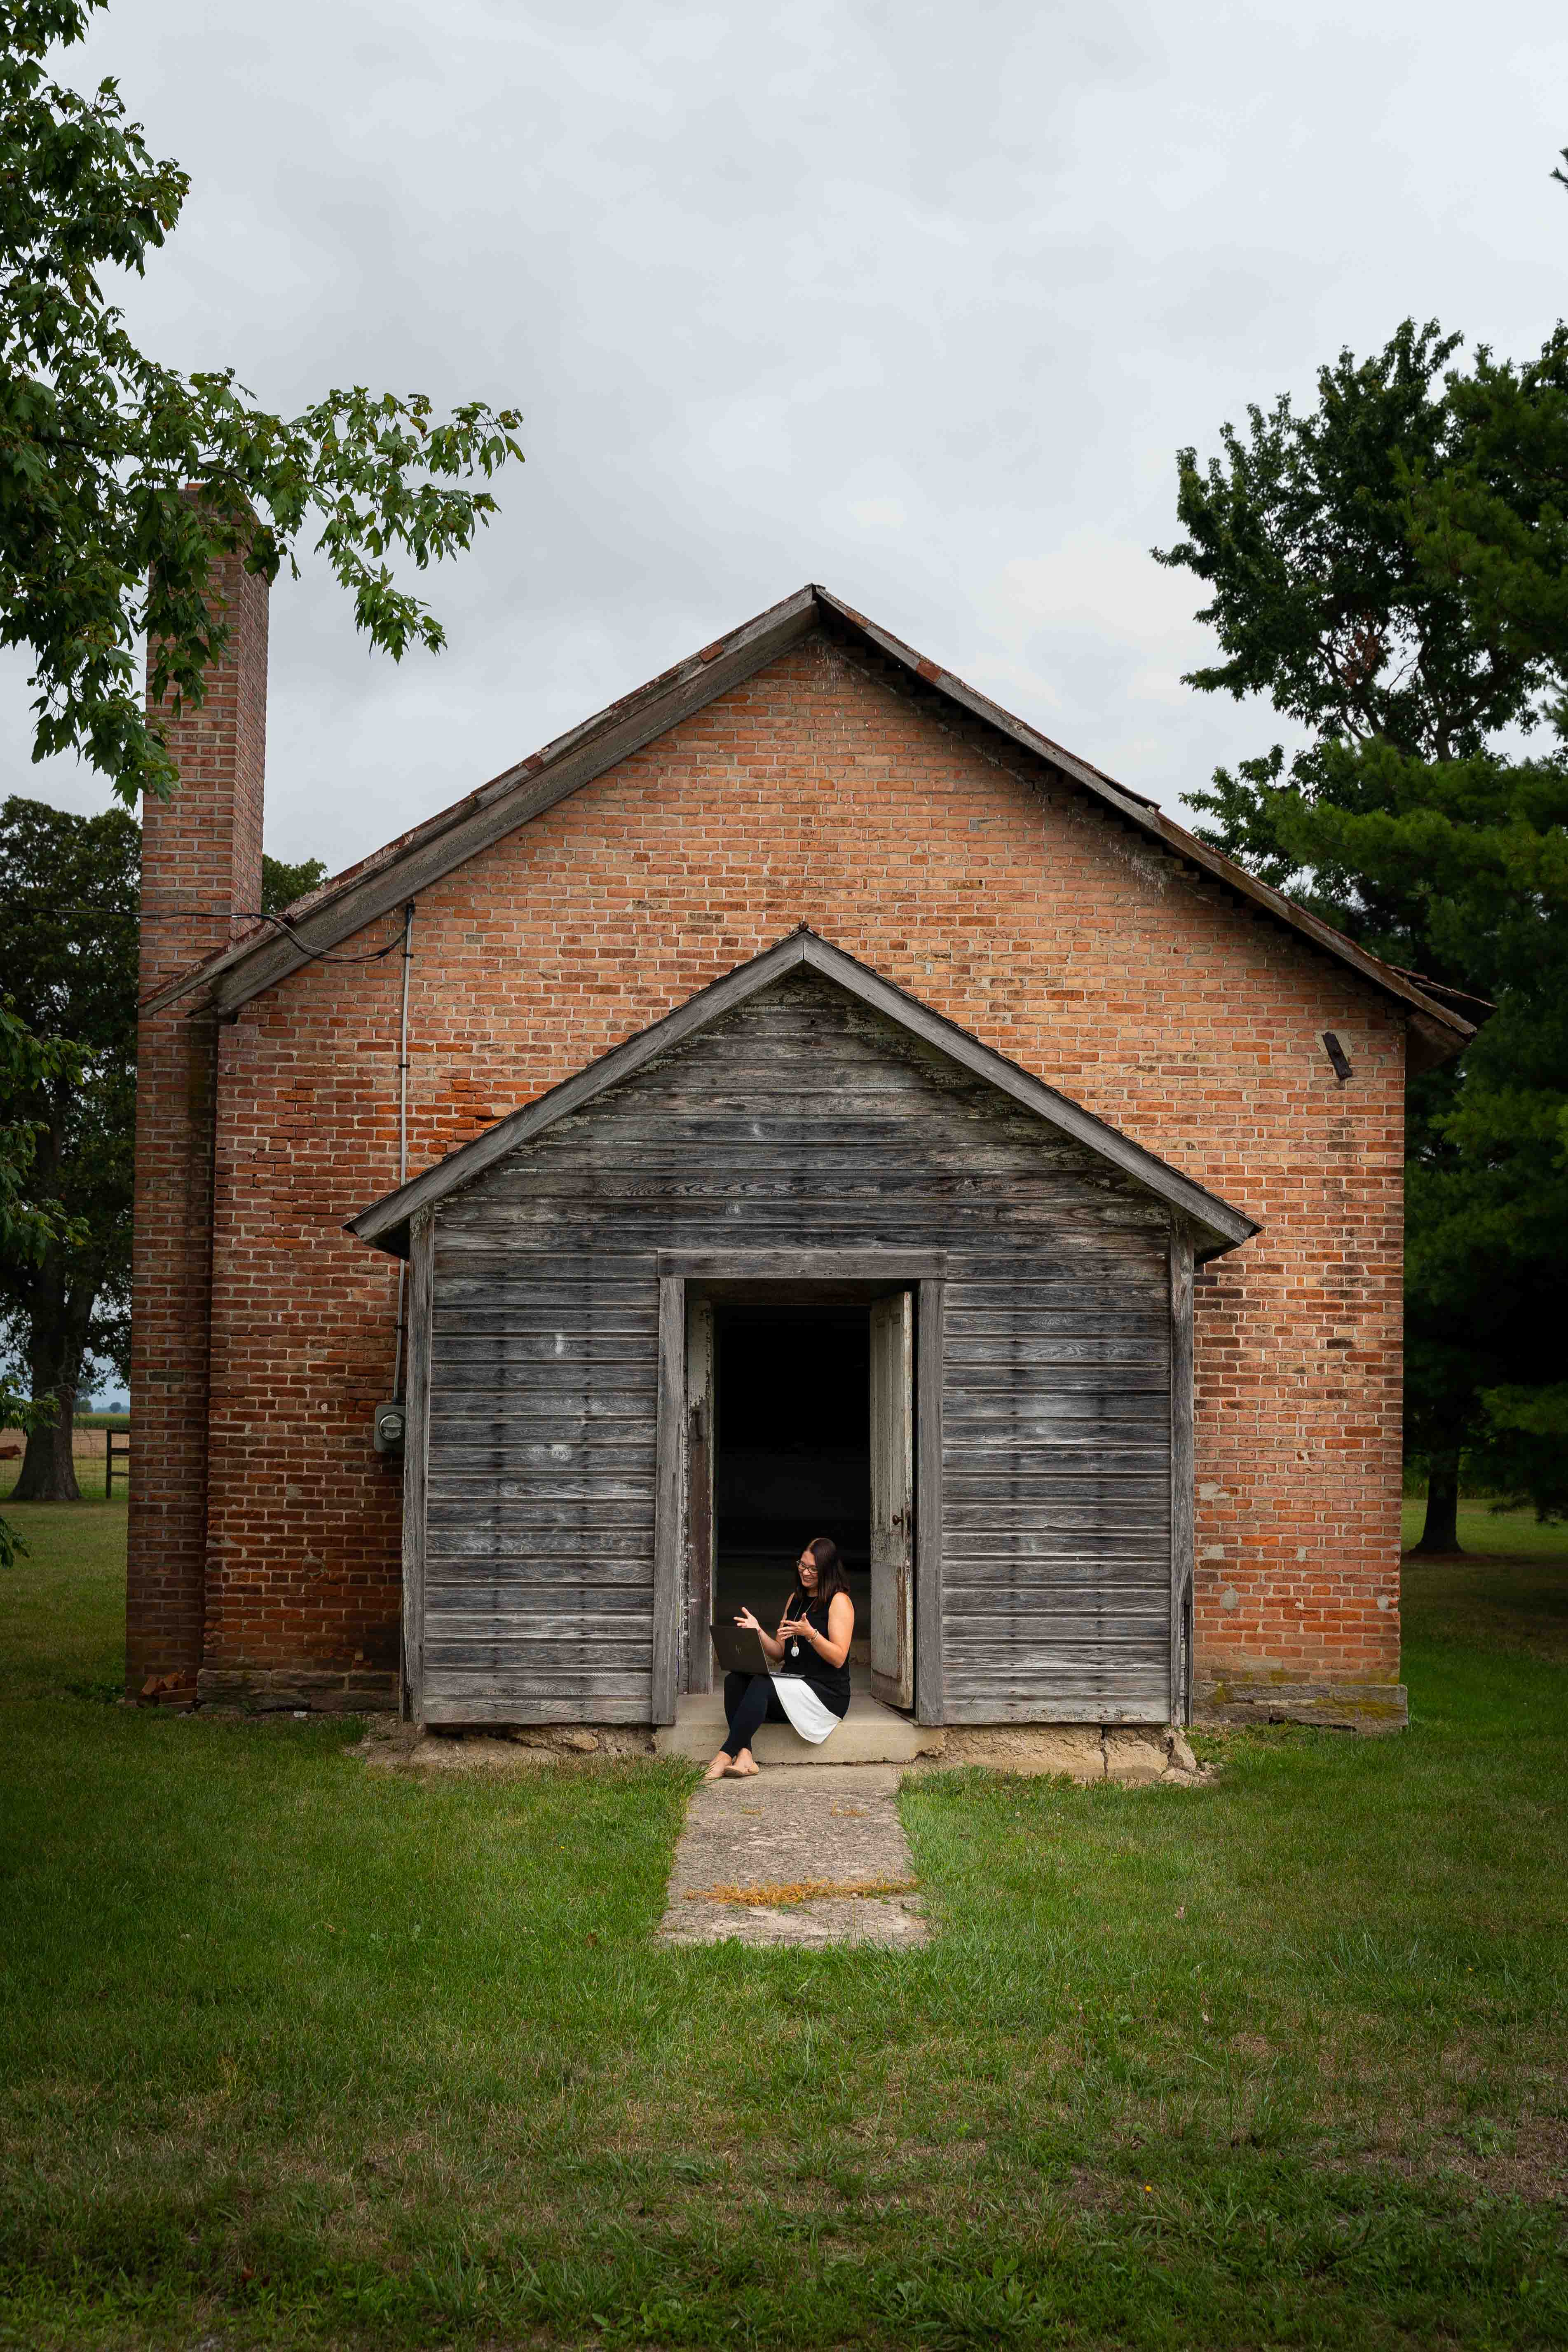 Christa Newtz in front of old schoolhouse